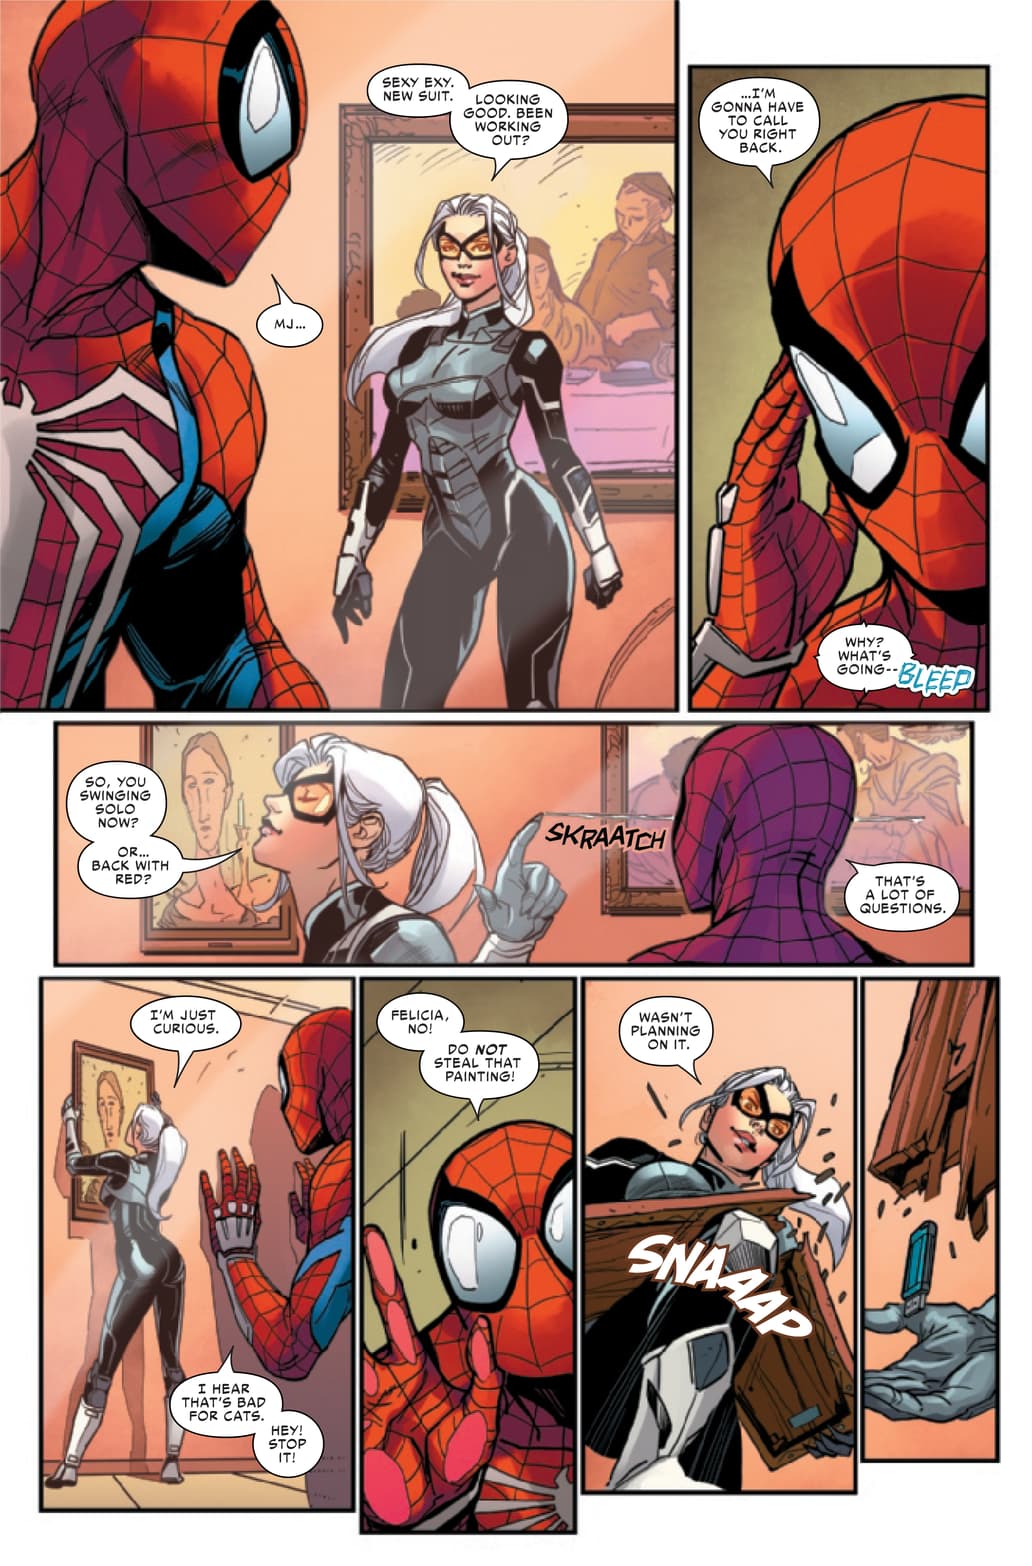 MARVEL'S SPIDER-MAN: THE BLACK CAT STRIKES #1 Preview — Art by Luca Maresca